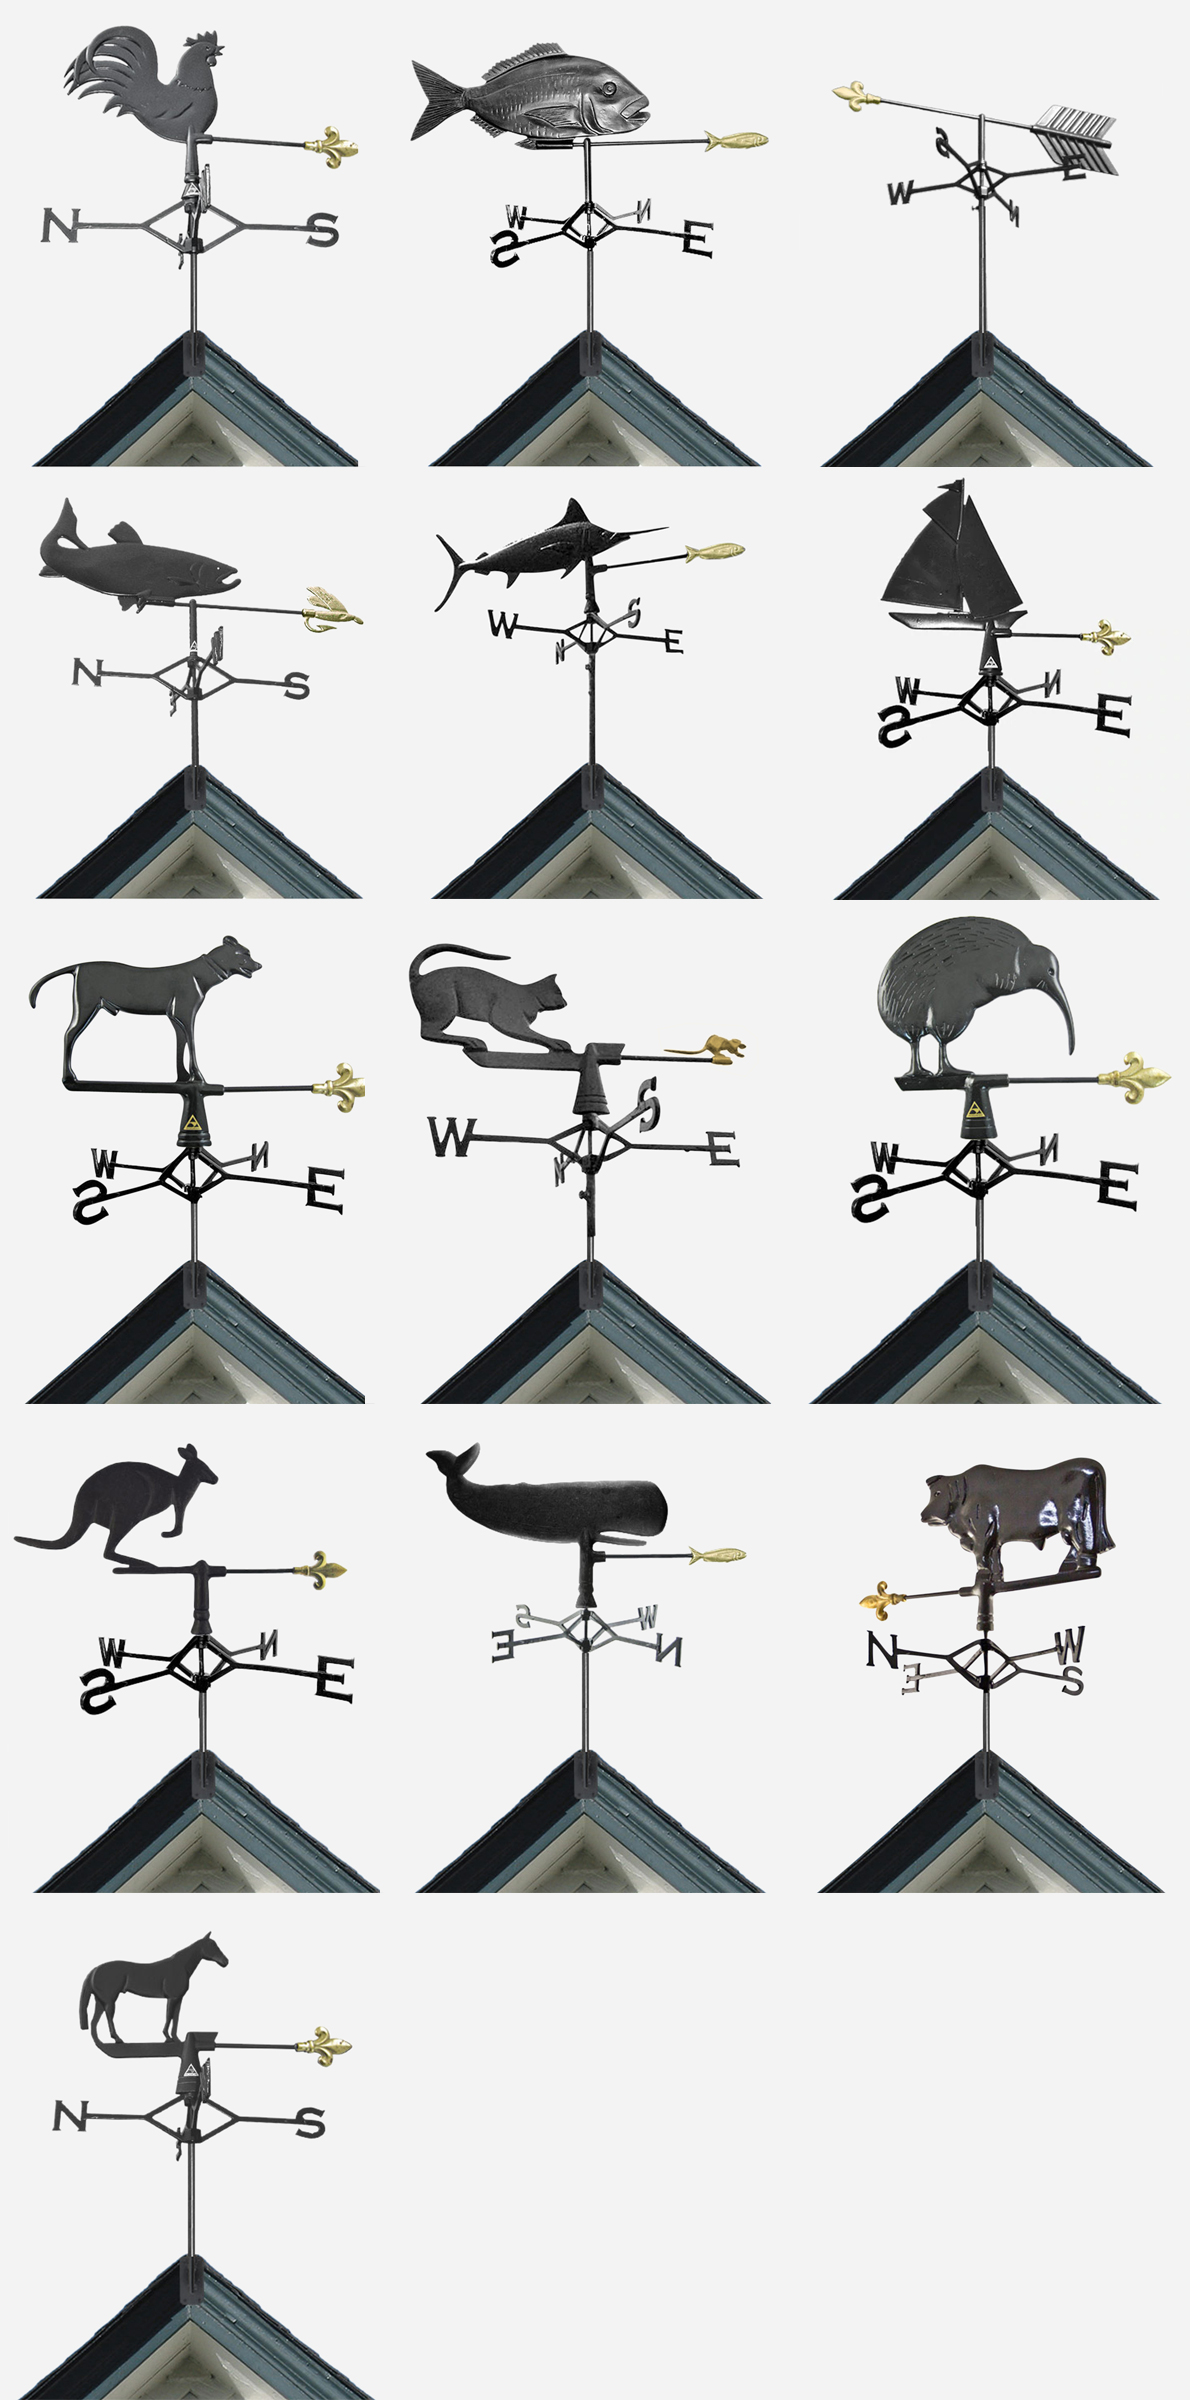 13 Weathervane designs available at Gubba Products